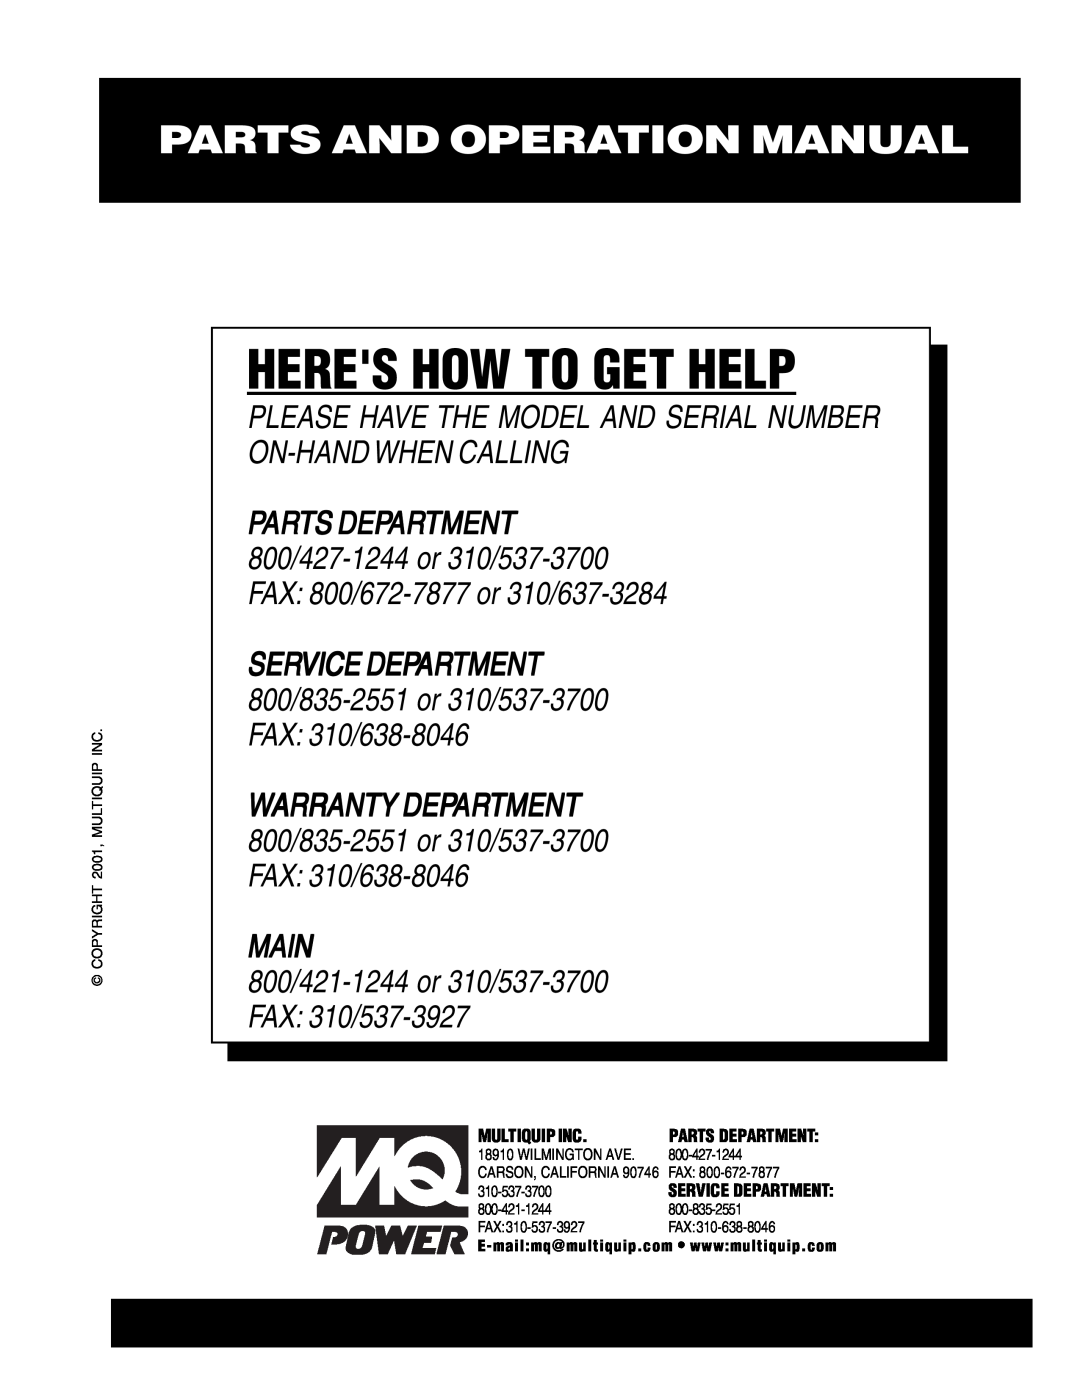 Multiquip DCA-25SSI Heres How To Get Help, Parts And Operation Manual, Main, 800/421-1244or 310/537-3700FAX: 310/537-3927 